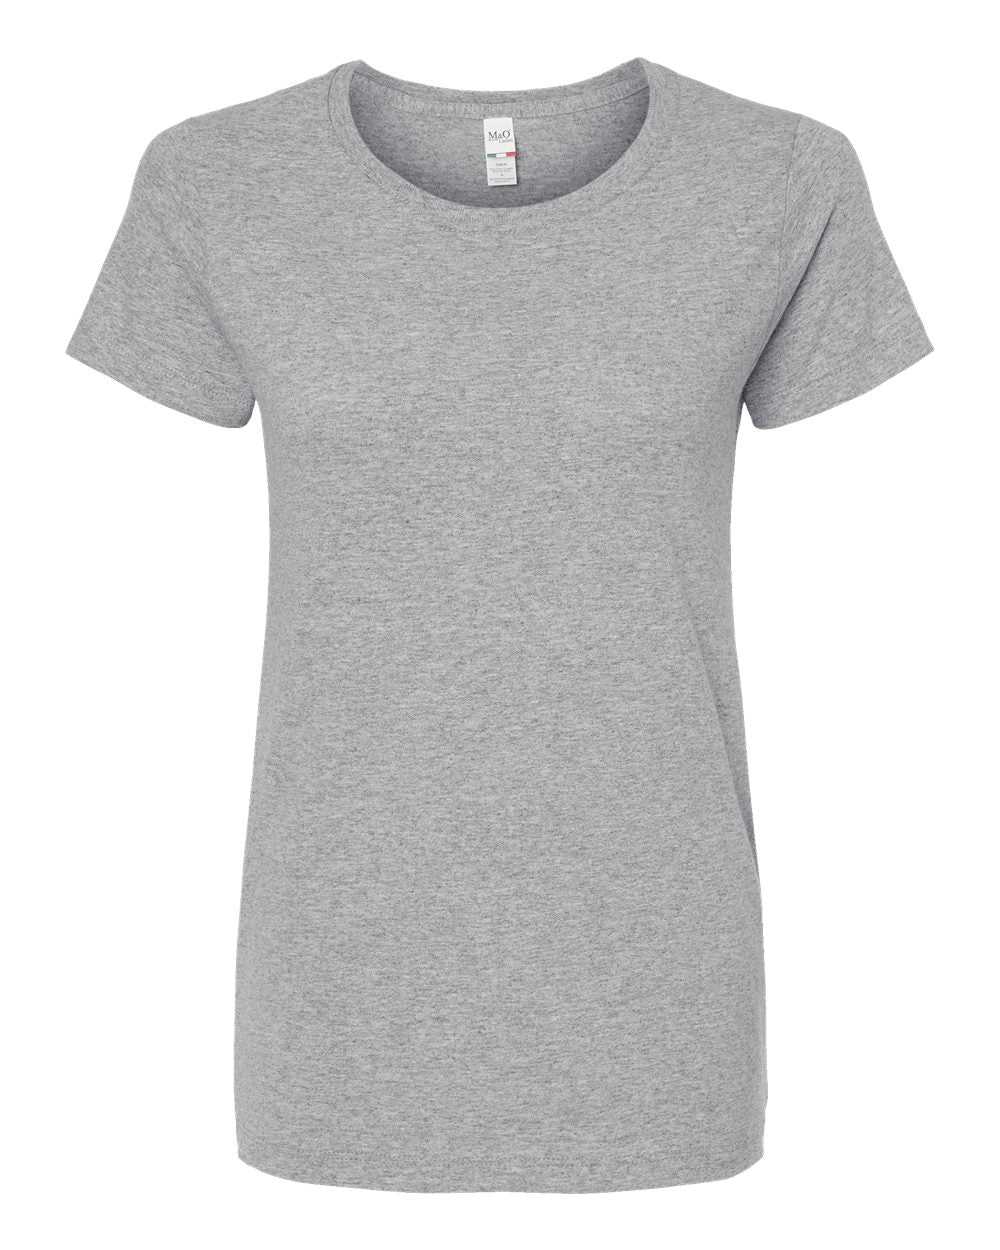 M&O 4810 Women's Gold Soft Touch T-Shirt - Athletic Gray - HIT a Double - 1